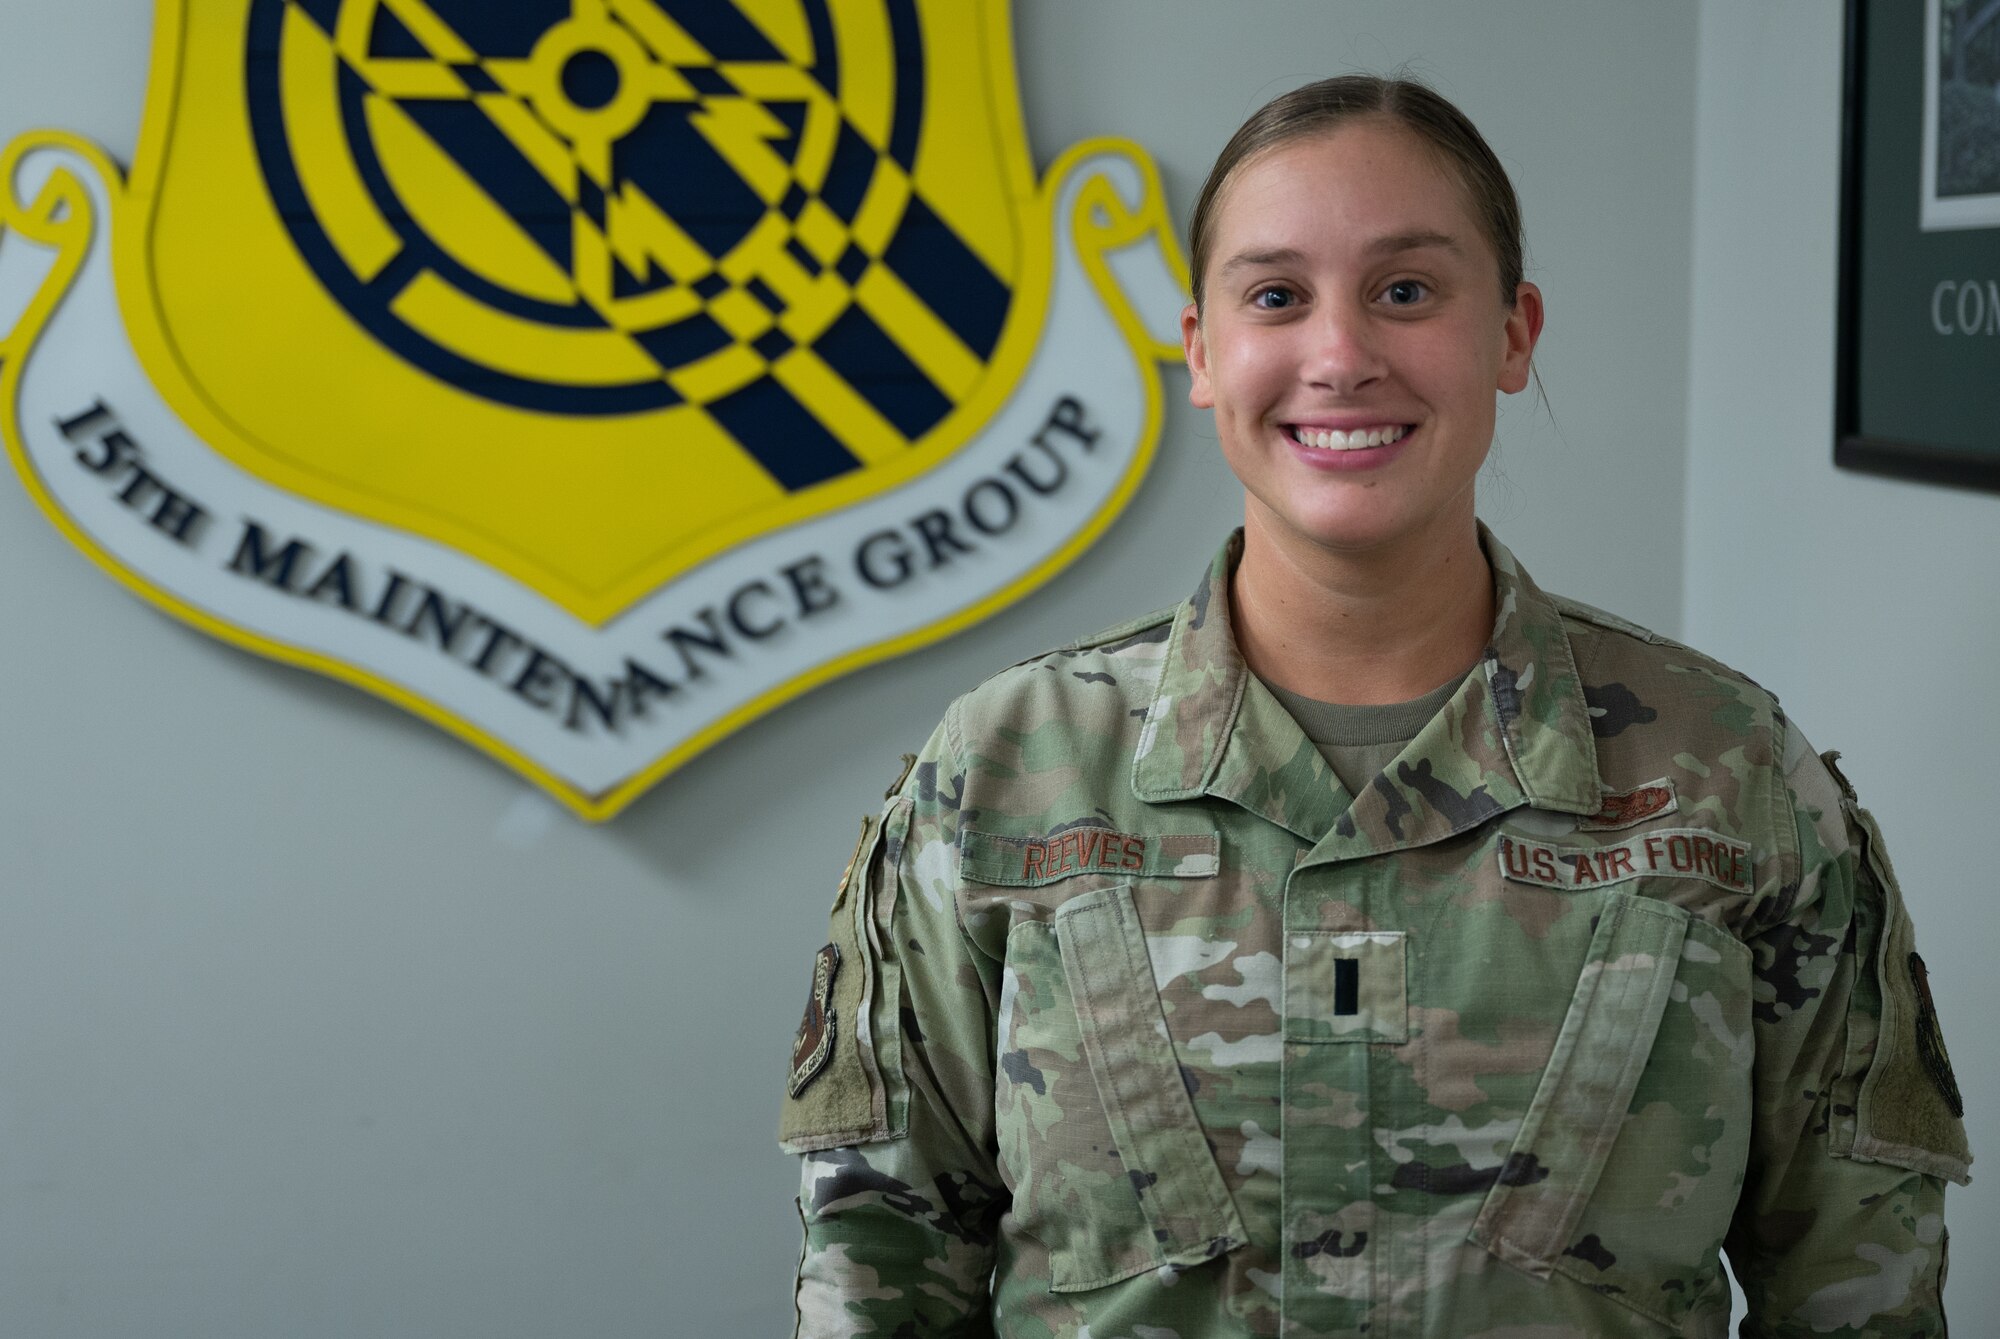 1st Lt. Bethany Reeves, 15th Maintenance Operations director of operations, poses for a photo at Joint Base Pearl Harbor-Hickam, Hawaii, Aug. 23, 2022. Reeves joined the Air Force in 2019 and is now working with scheduling analysis, unit deployment managers, quality assurance and maintenance training managers. (U.S. Air Force photo by Staff Sgt. Alan Ricker)